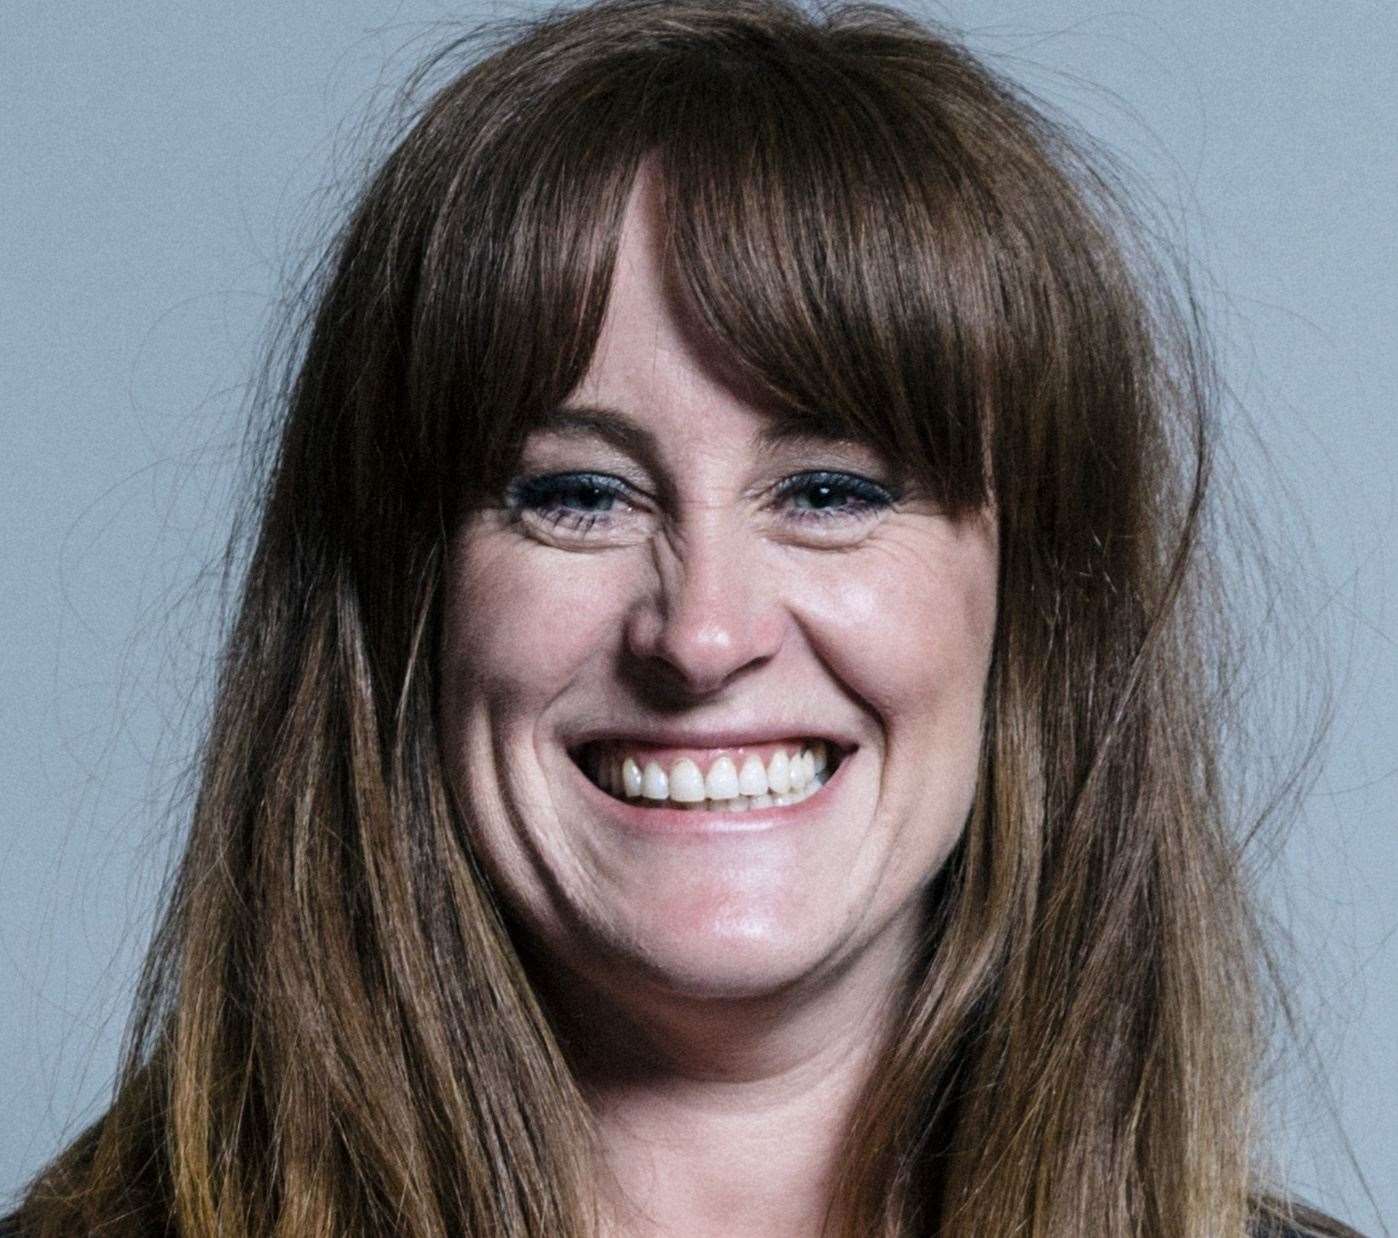 MP for Rochester and Strood Kelly Tolhurst